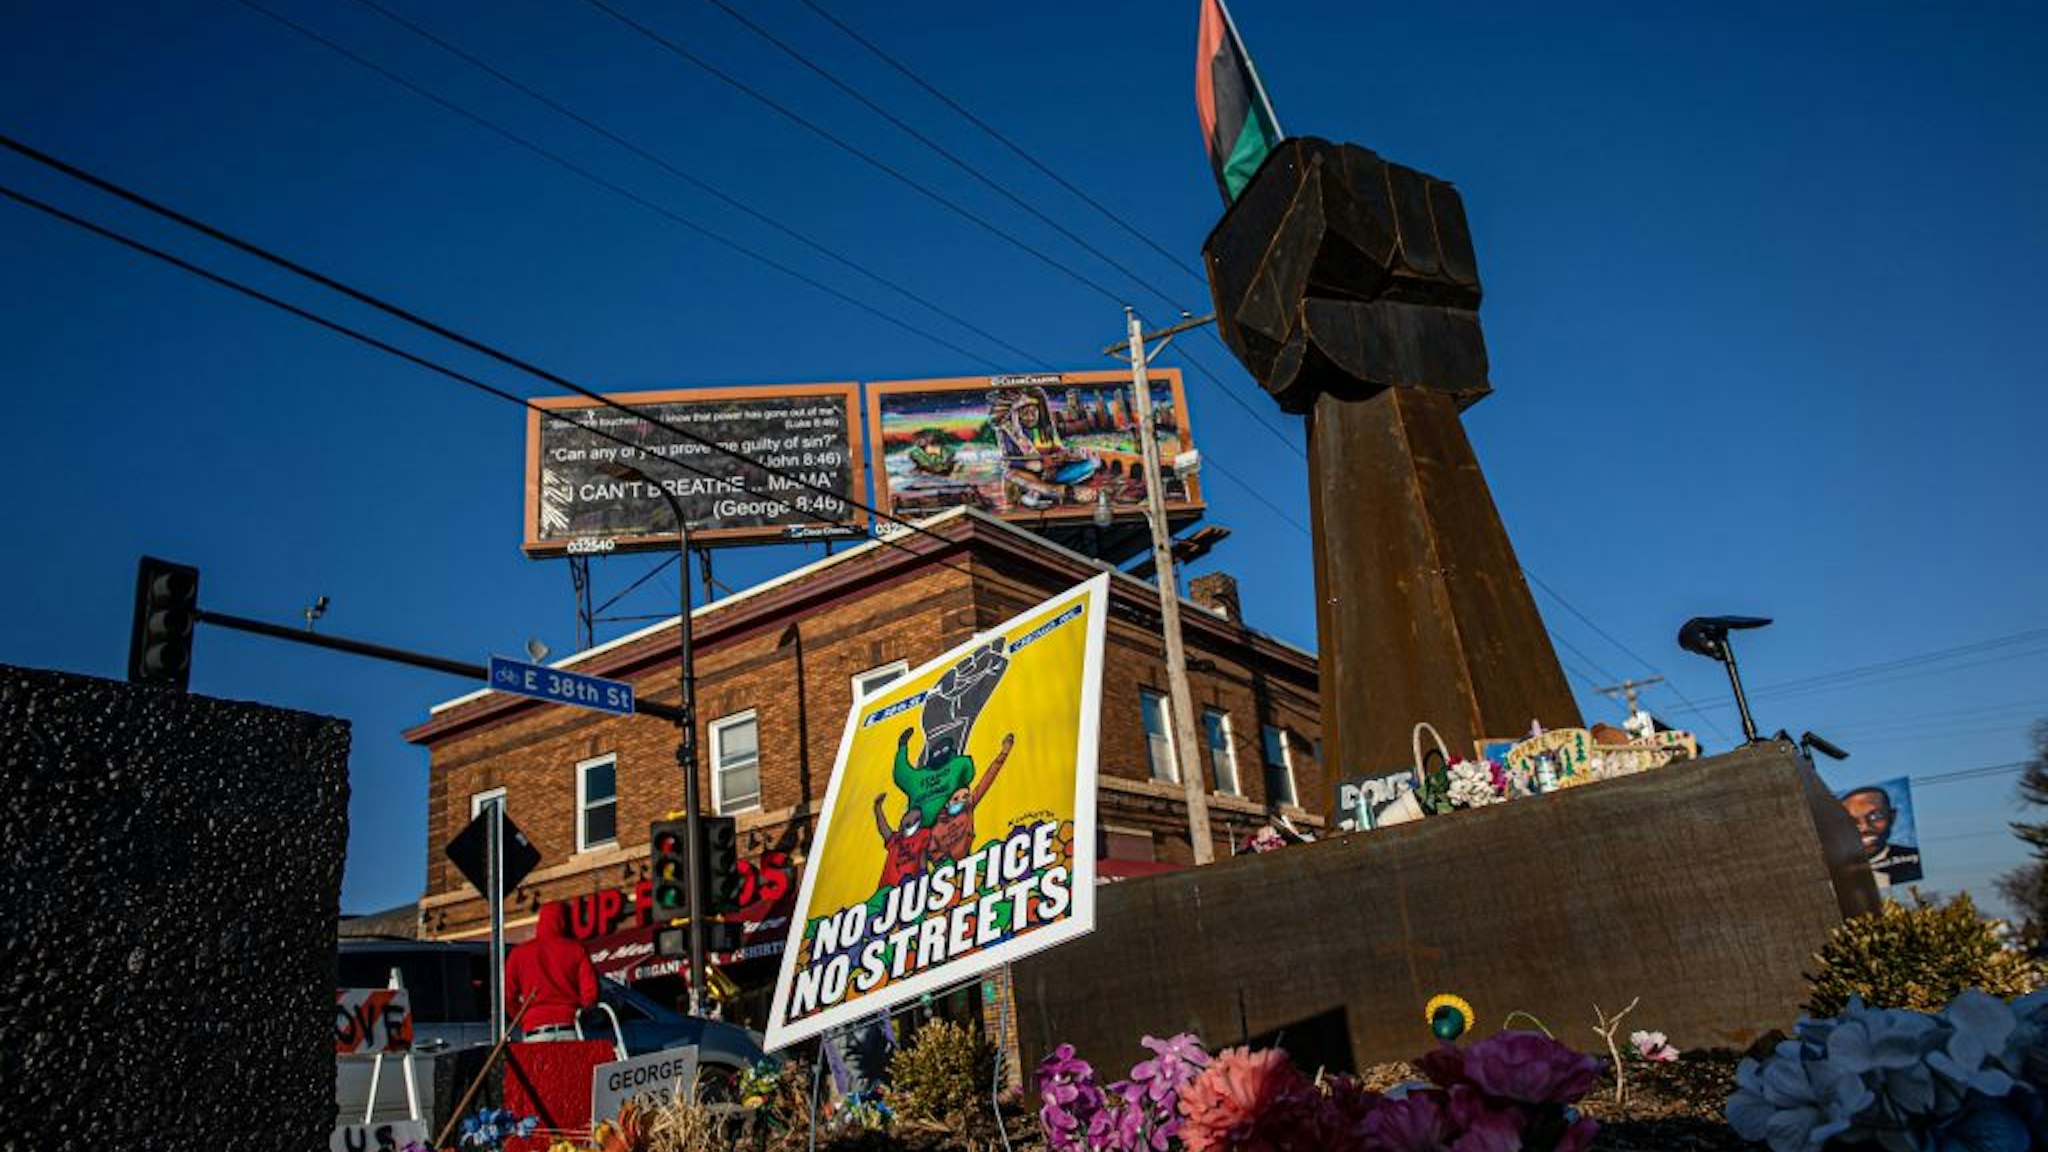 A sculpture of a raised fist stands near a makeshift memorial to George Floyd near the site where he died in police custody, on March 12, 2021 in Minneapolis, Minnesota. - The Minnesota city of Minneapolis reached a $27 million "wrongful death" settlement on March 12y with the family of George Floyd, the Black man who died while being arrested by a white police officer, sparking mass protests for racial justice across the United States. (Photo by Kerem Yucel / AFP) (Photo by KEREM YUCEL/AFP via Getty Images)